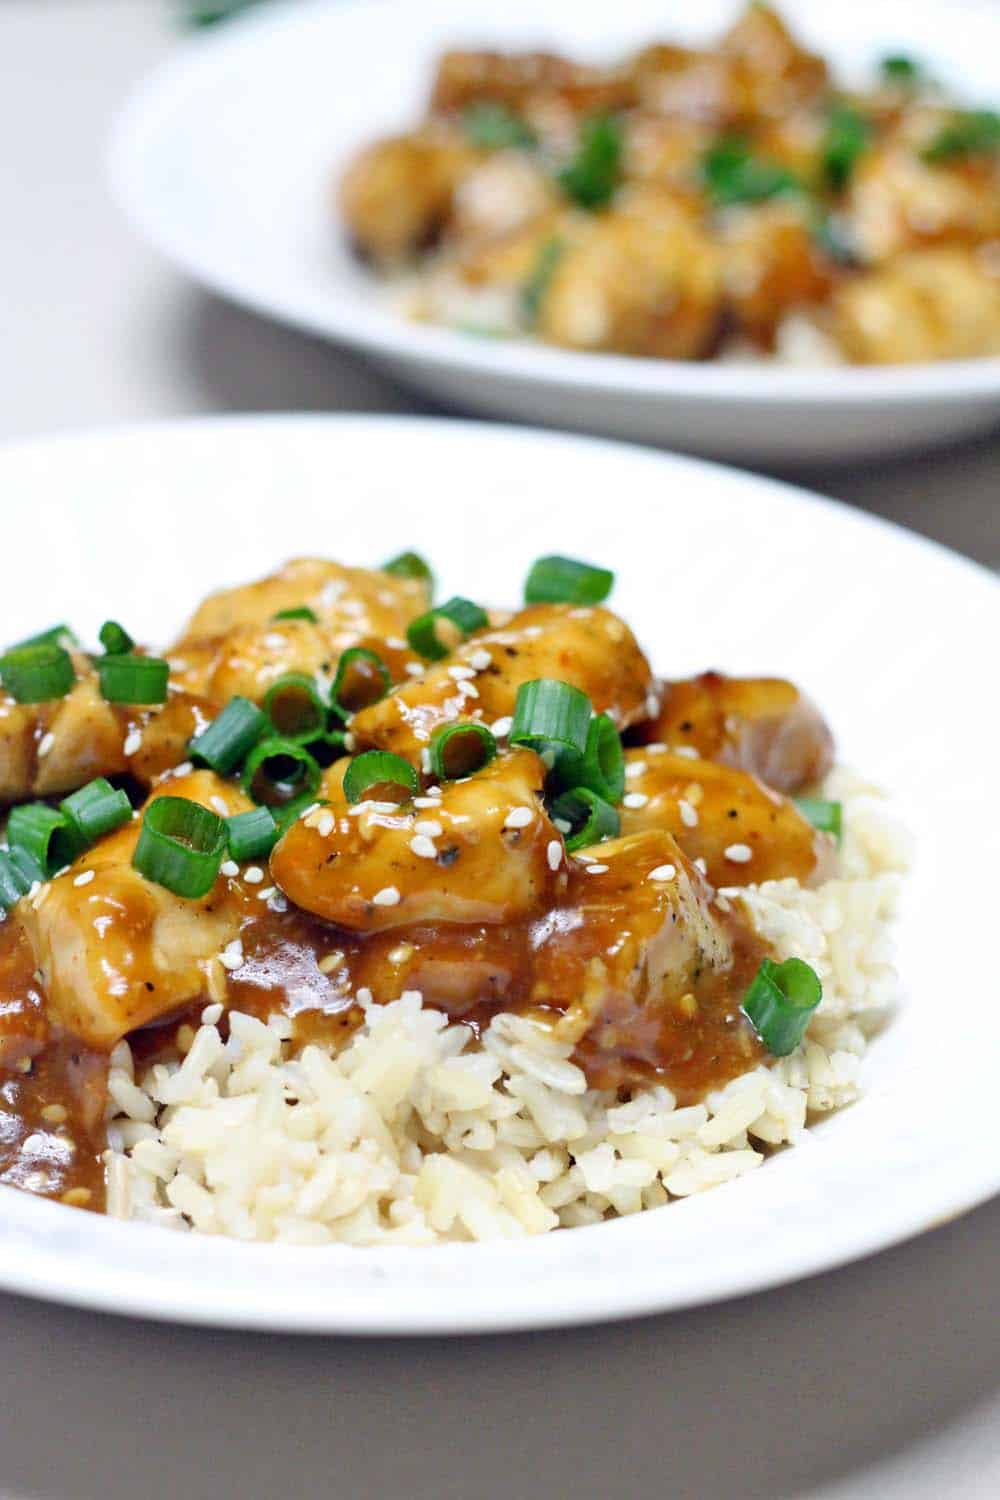 Skinny Orange Sesame Chicken | The skinny version of one of your Chinese take-out favorites, this orange sesame chicken is not deep fried so it's lighter and healthier. It's SO EASY to make at home in only twenty minutes!